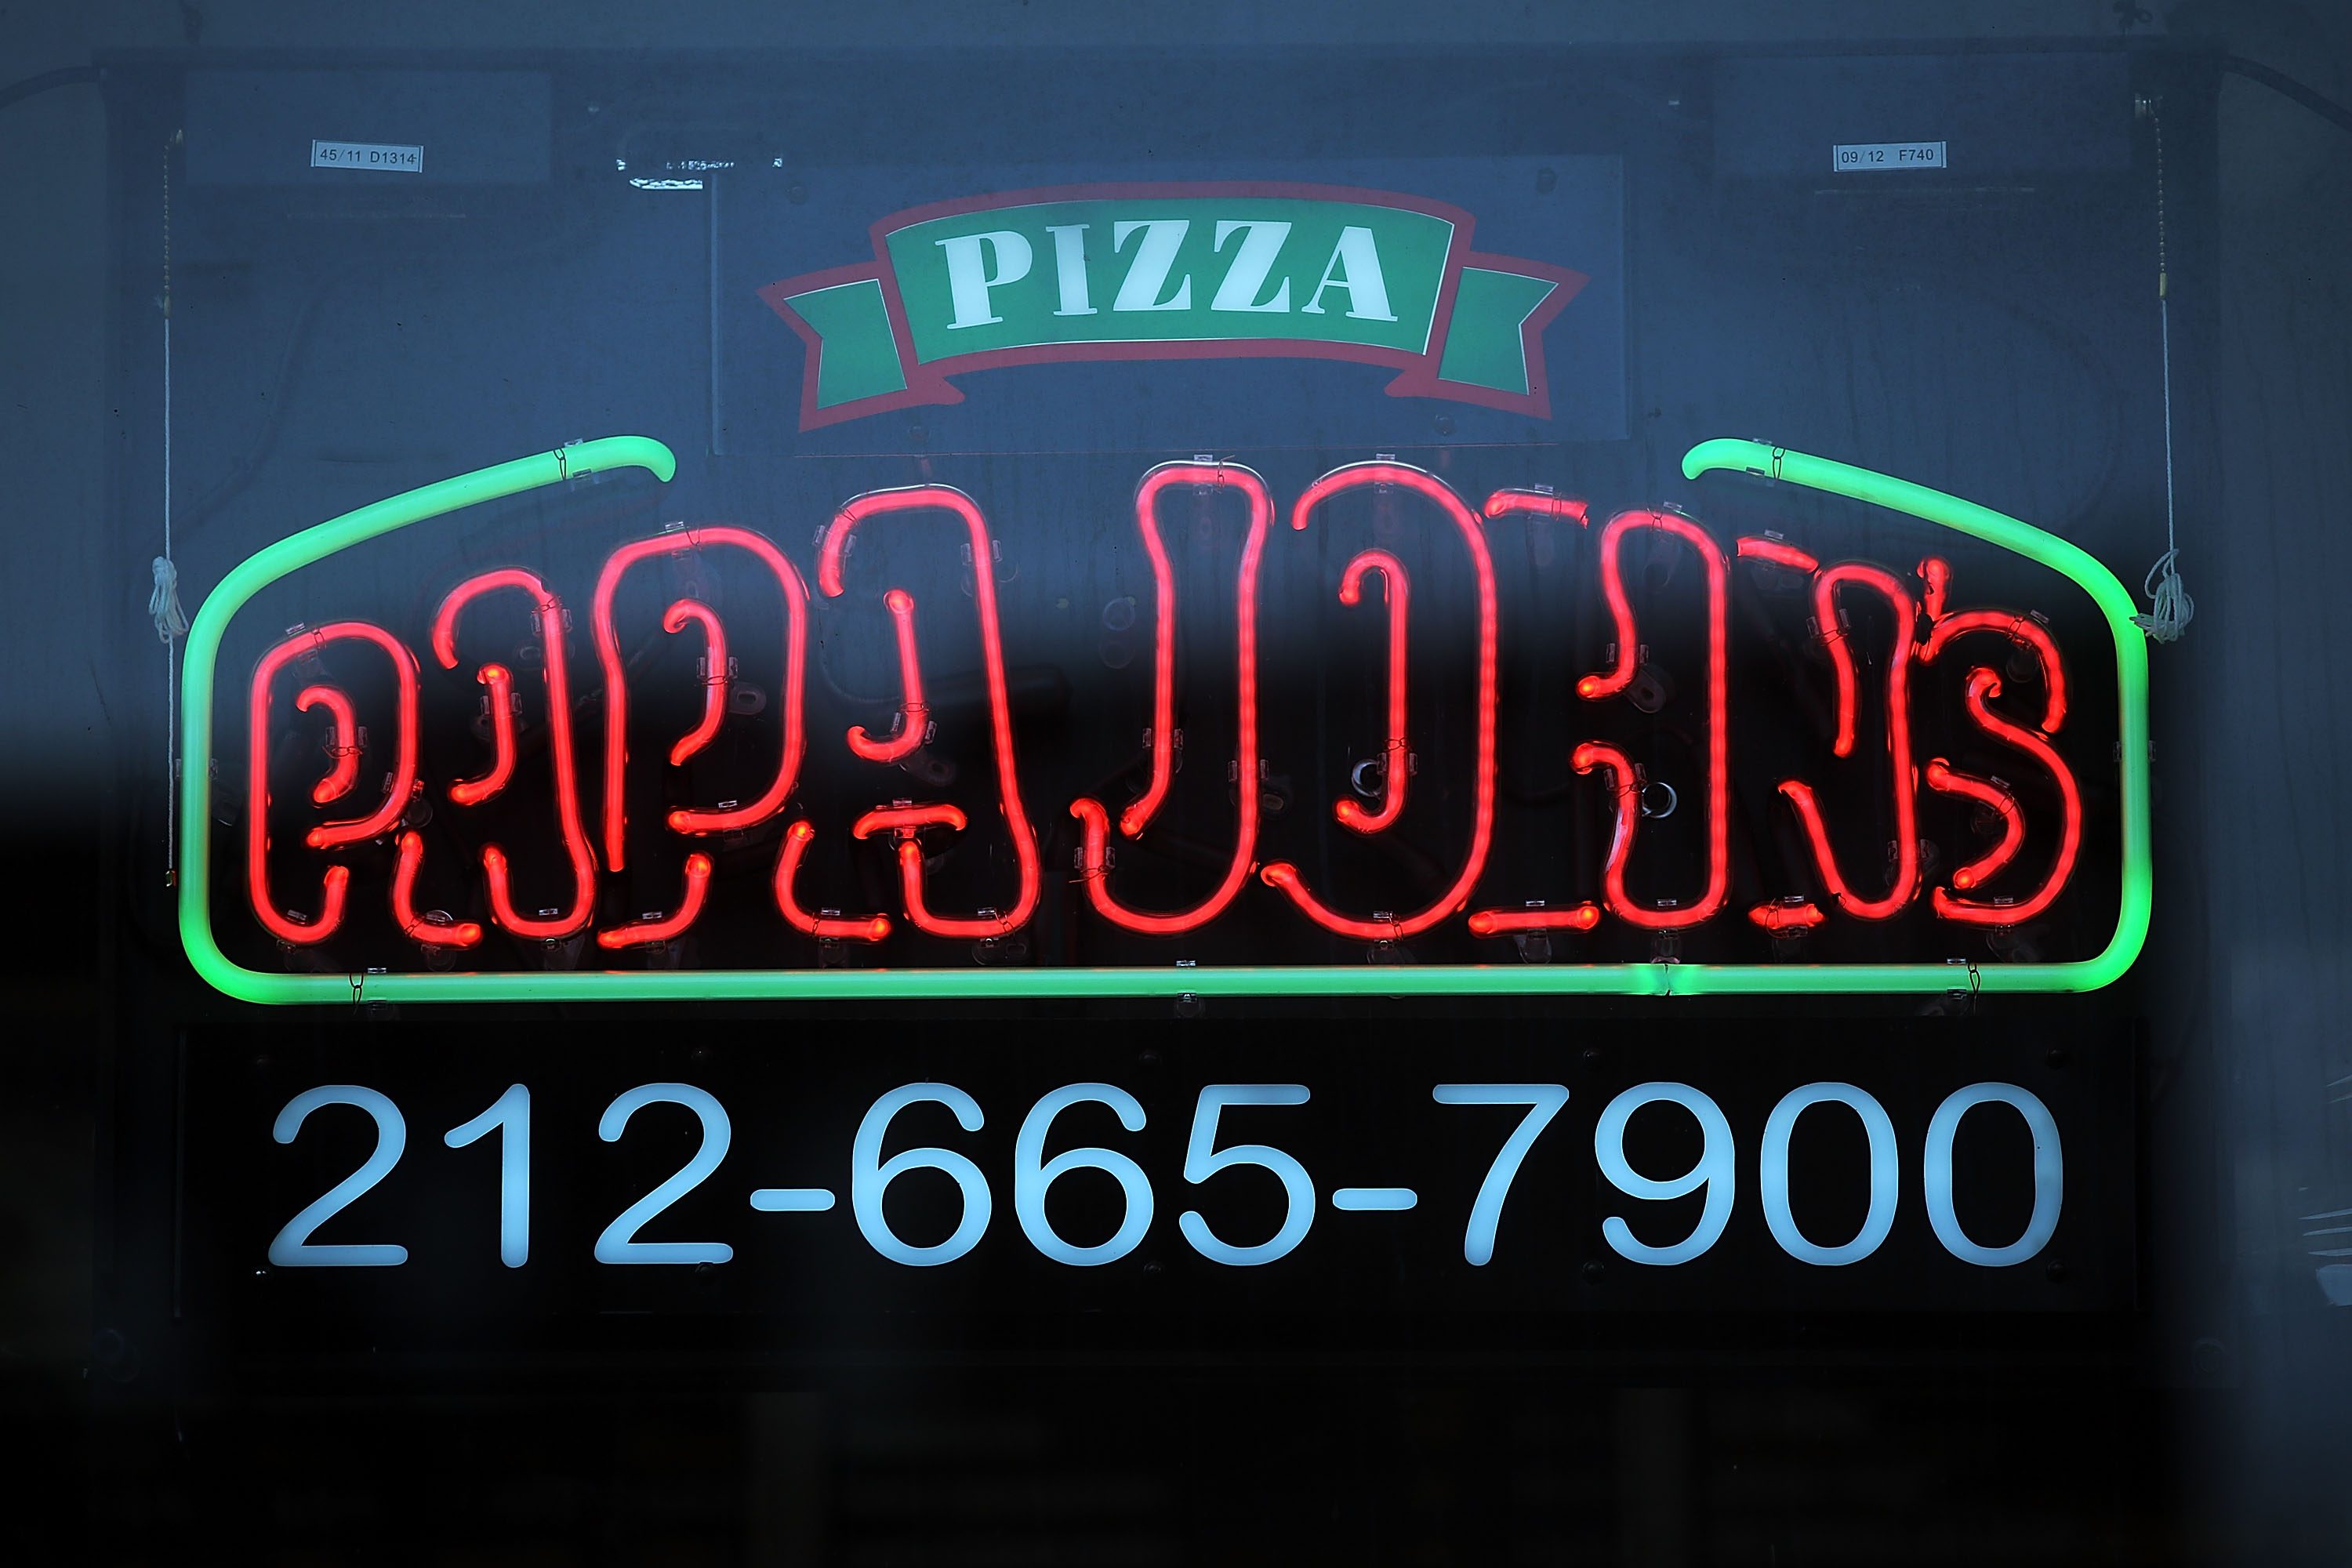 A Papa Johns restaurant in NYC